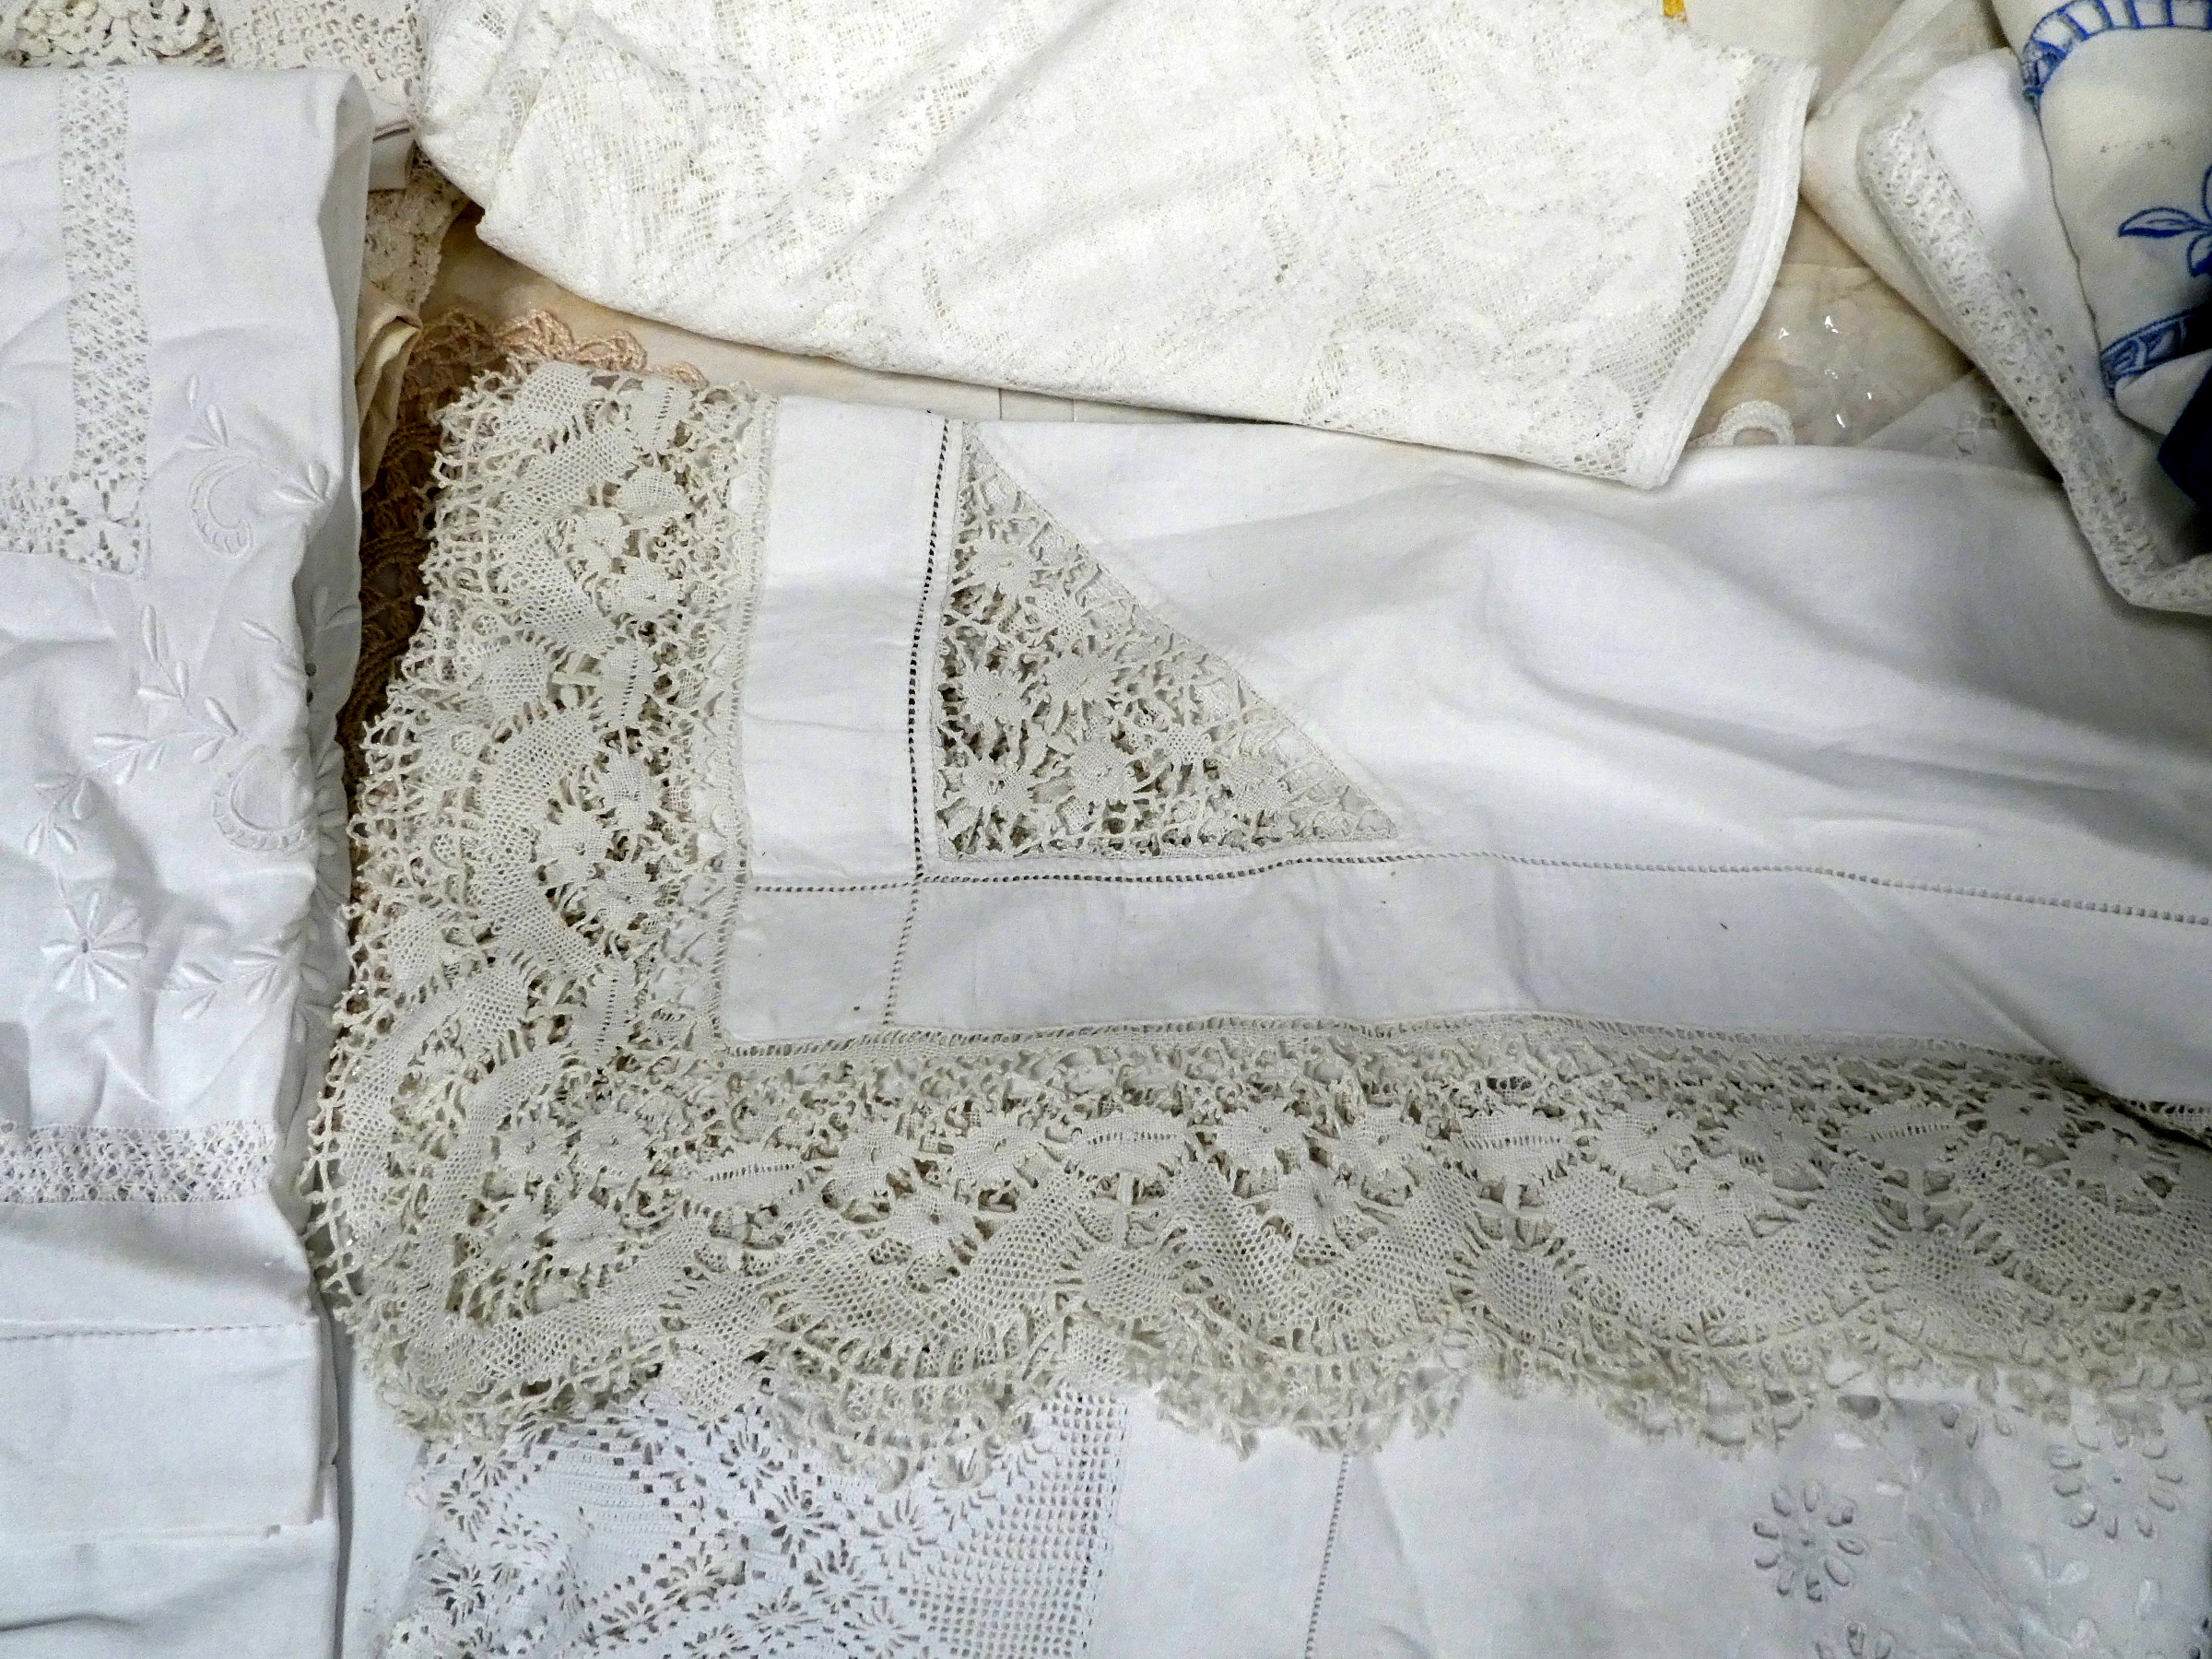 A quantity of 20th century lace and white-ware - together with a quantity of embroidered items. ( - Image 2 of 3